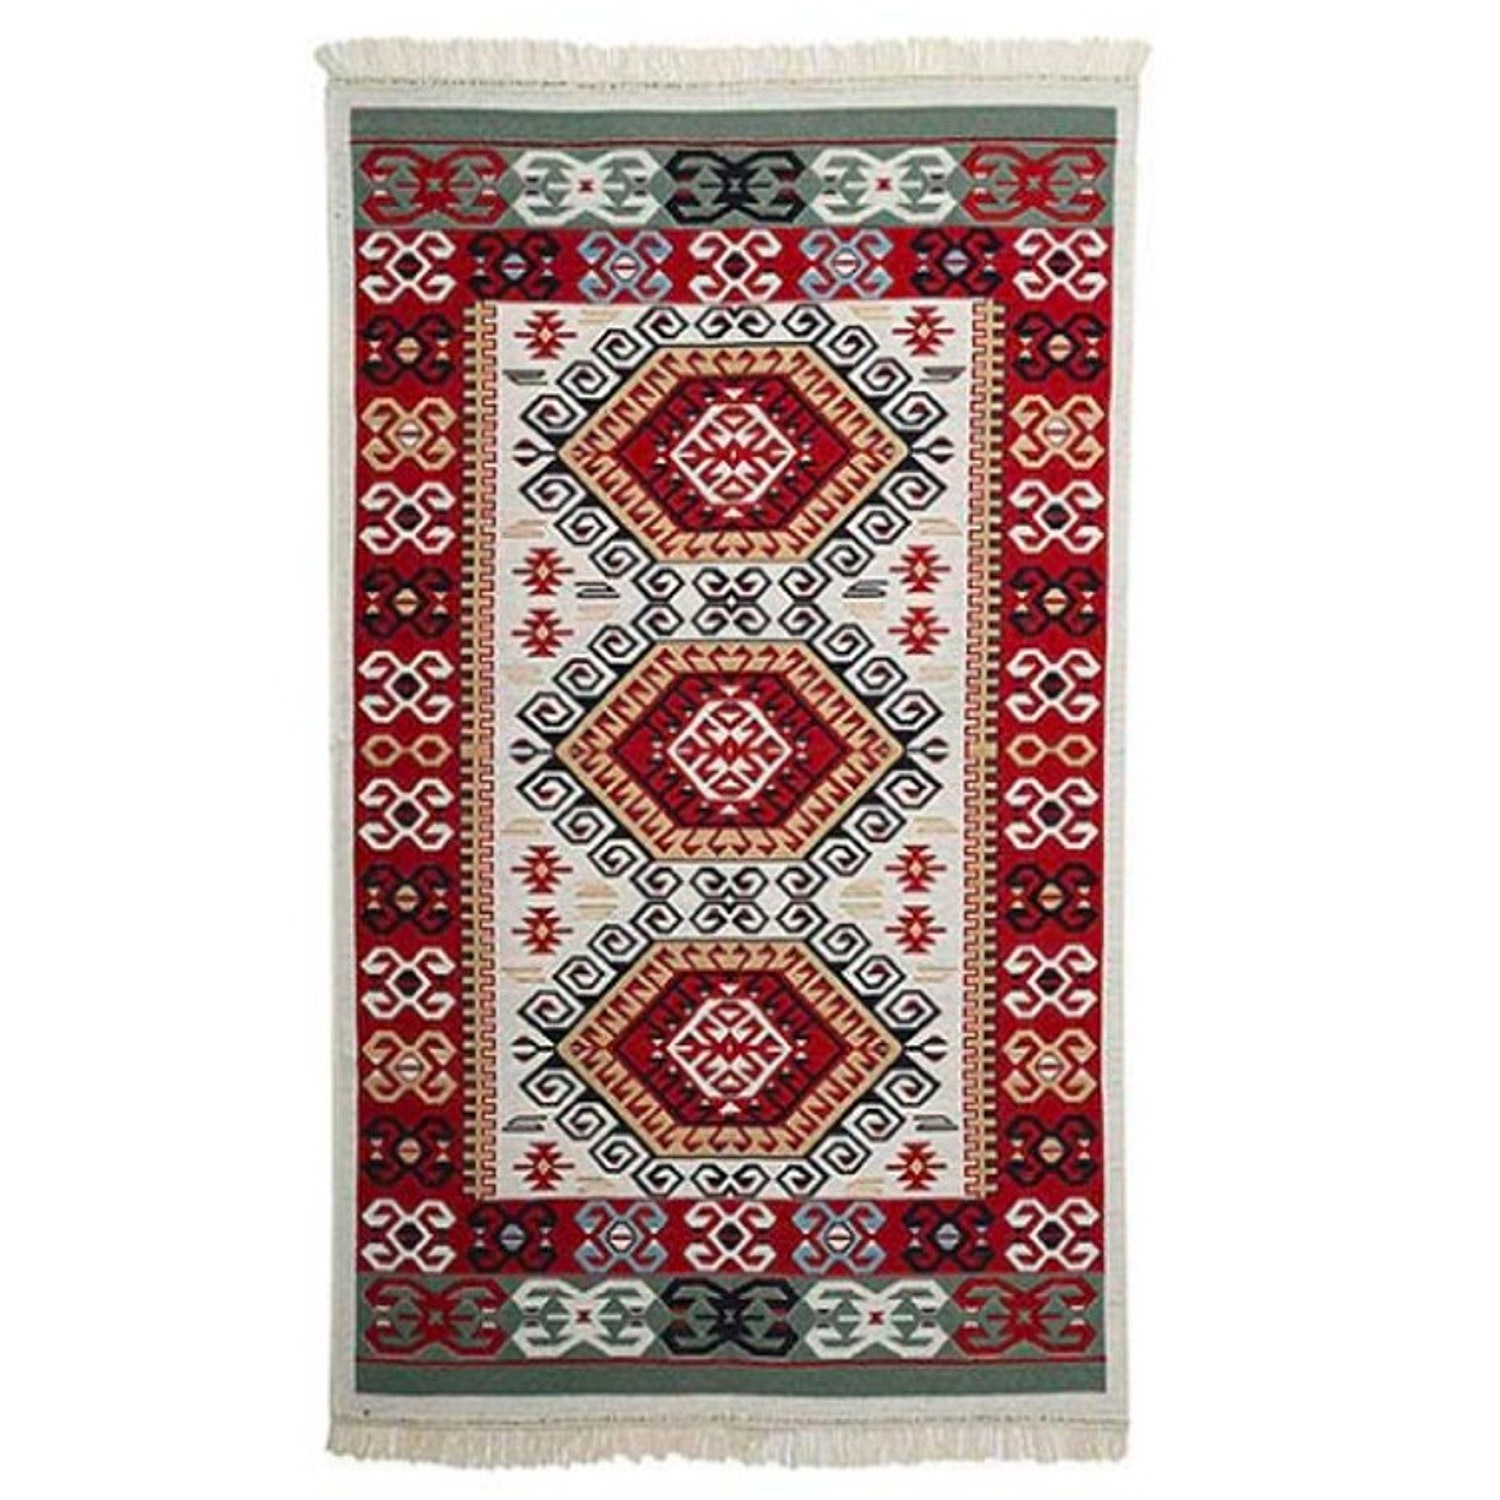 Turkish  Authentic Traditional Machine Made Kilim Rugs (Size 120x80 cm) - Red